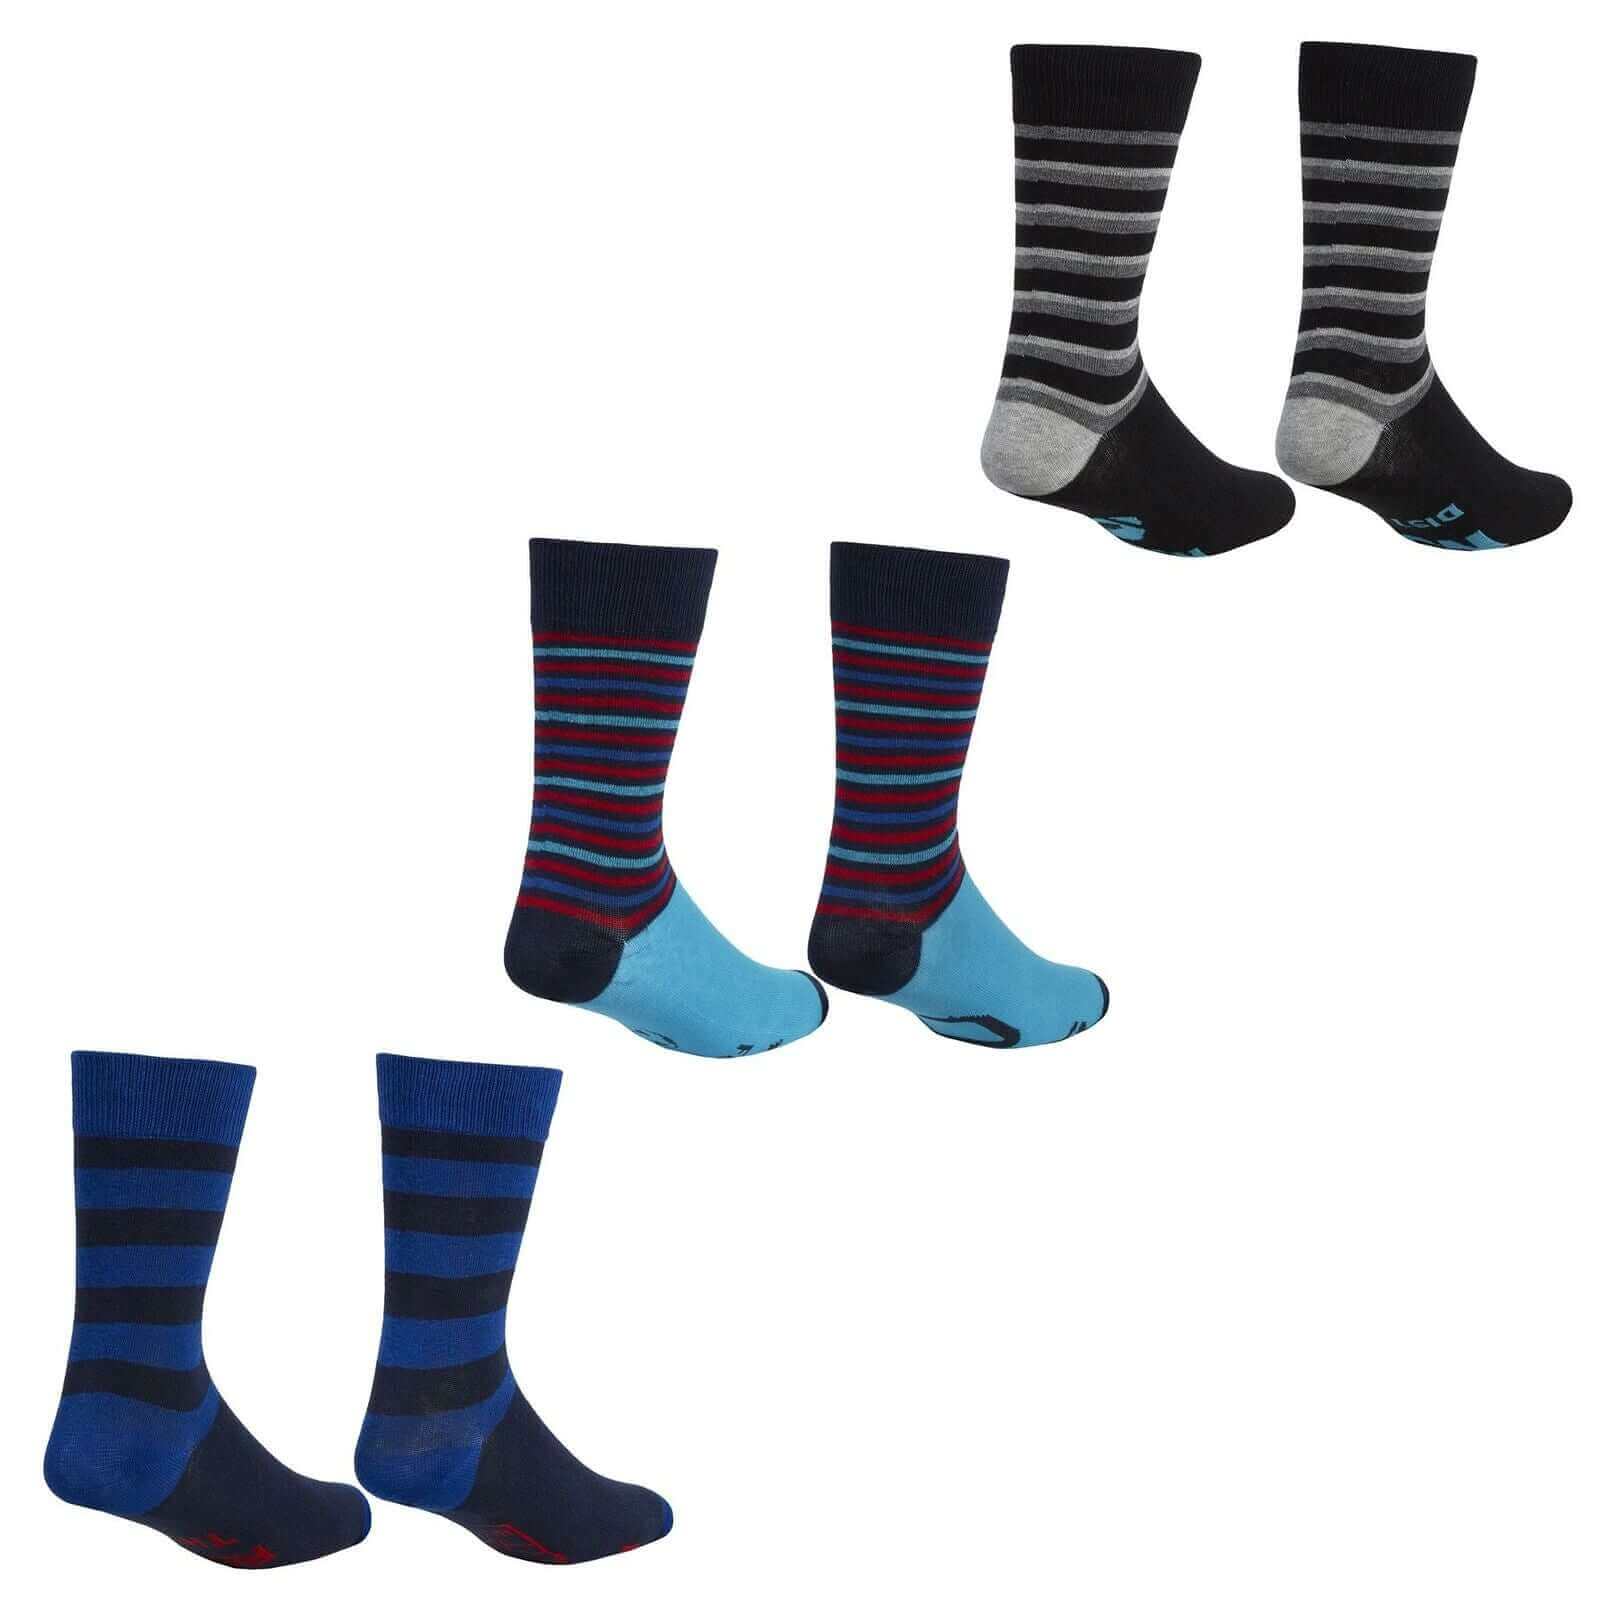 Pack Of 3 Men's Slogan Socks Sole Design Novelty Sock, Football & Rugby. Buy now for £6.00. A Socks by Sock Stack. 6-11, assorted, beer, boot, boys, breathable, comfortable, cosy, cotton, dress socks, football, mens, mens socks, novelty, polyester, rugby,